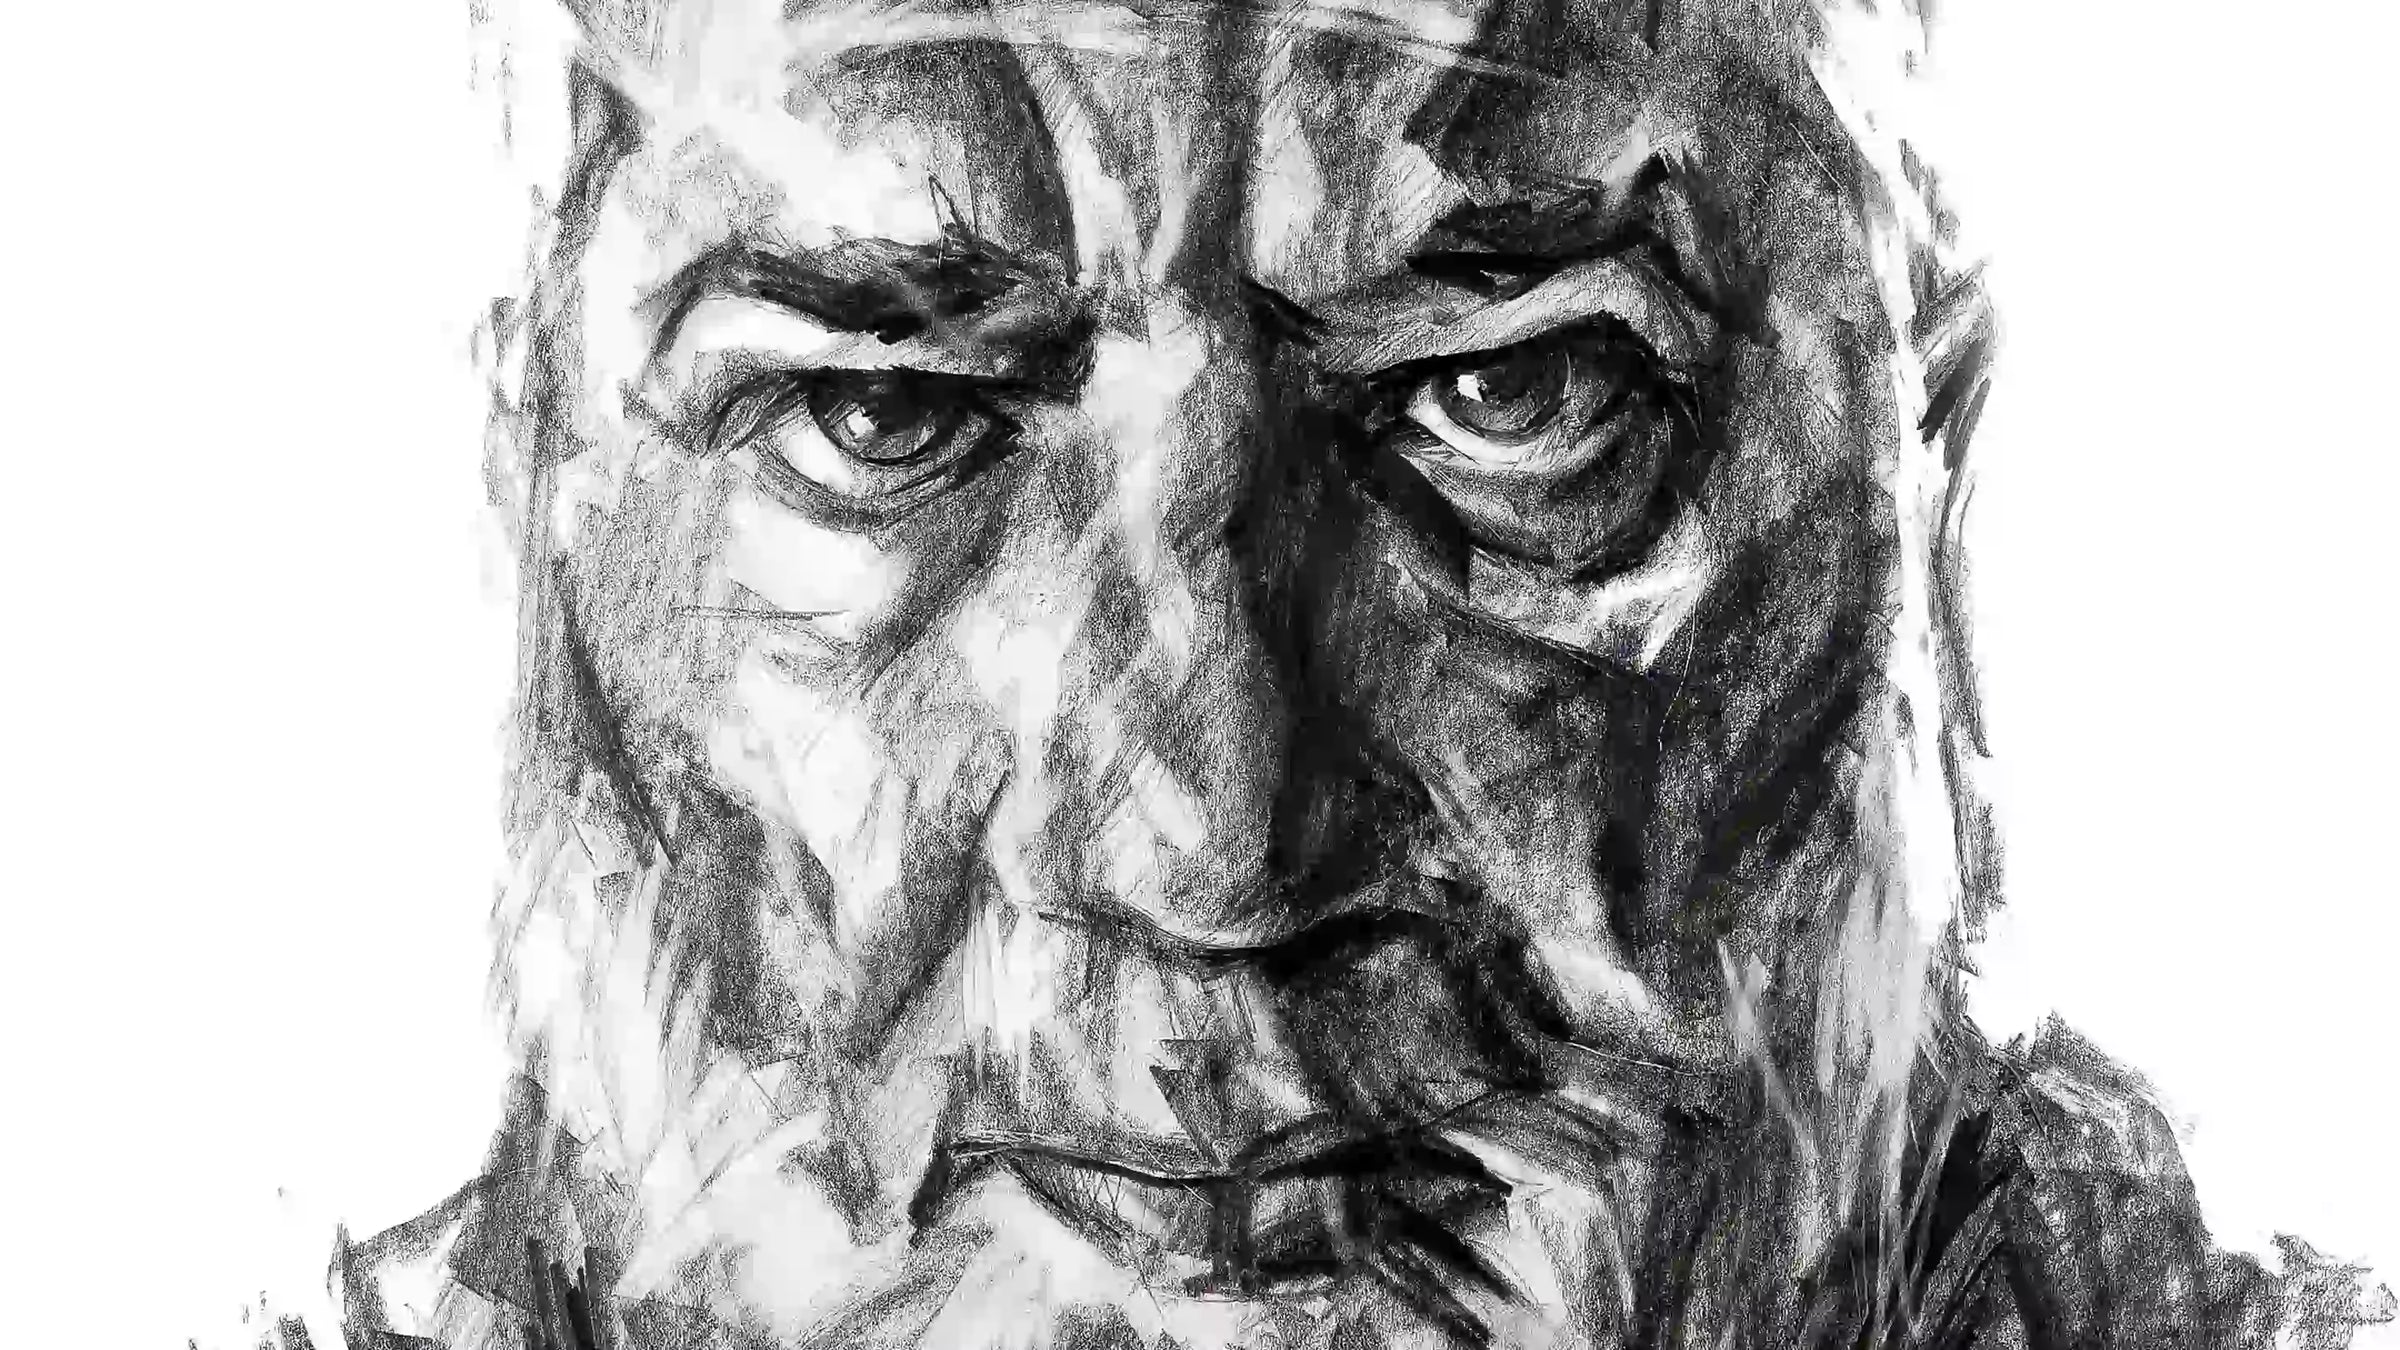 Black and white graphite portrait by renowned Armenian artist, Samvel Marutyan. Characterized by bold, large strokes, capturing the essence and emotion of the subject in striking monochrome.